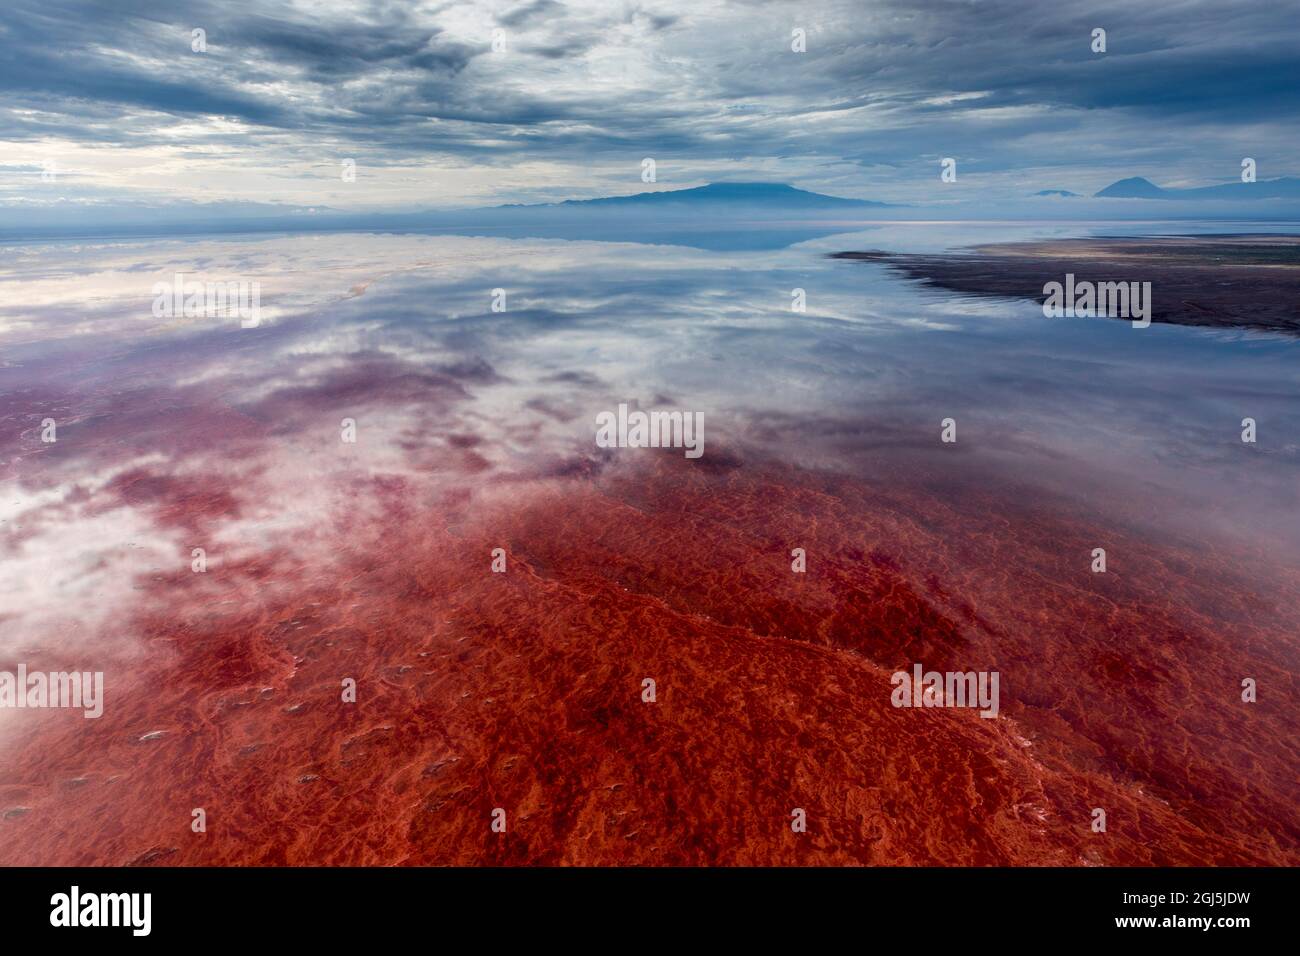 Africa, Tanzania, Enhanced contrast aerial view of patterns of red algae and salt formations in shallow salt waters of Lake Natron and distant Ol Doin Stock Photo